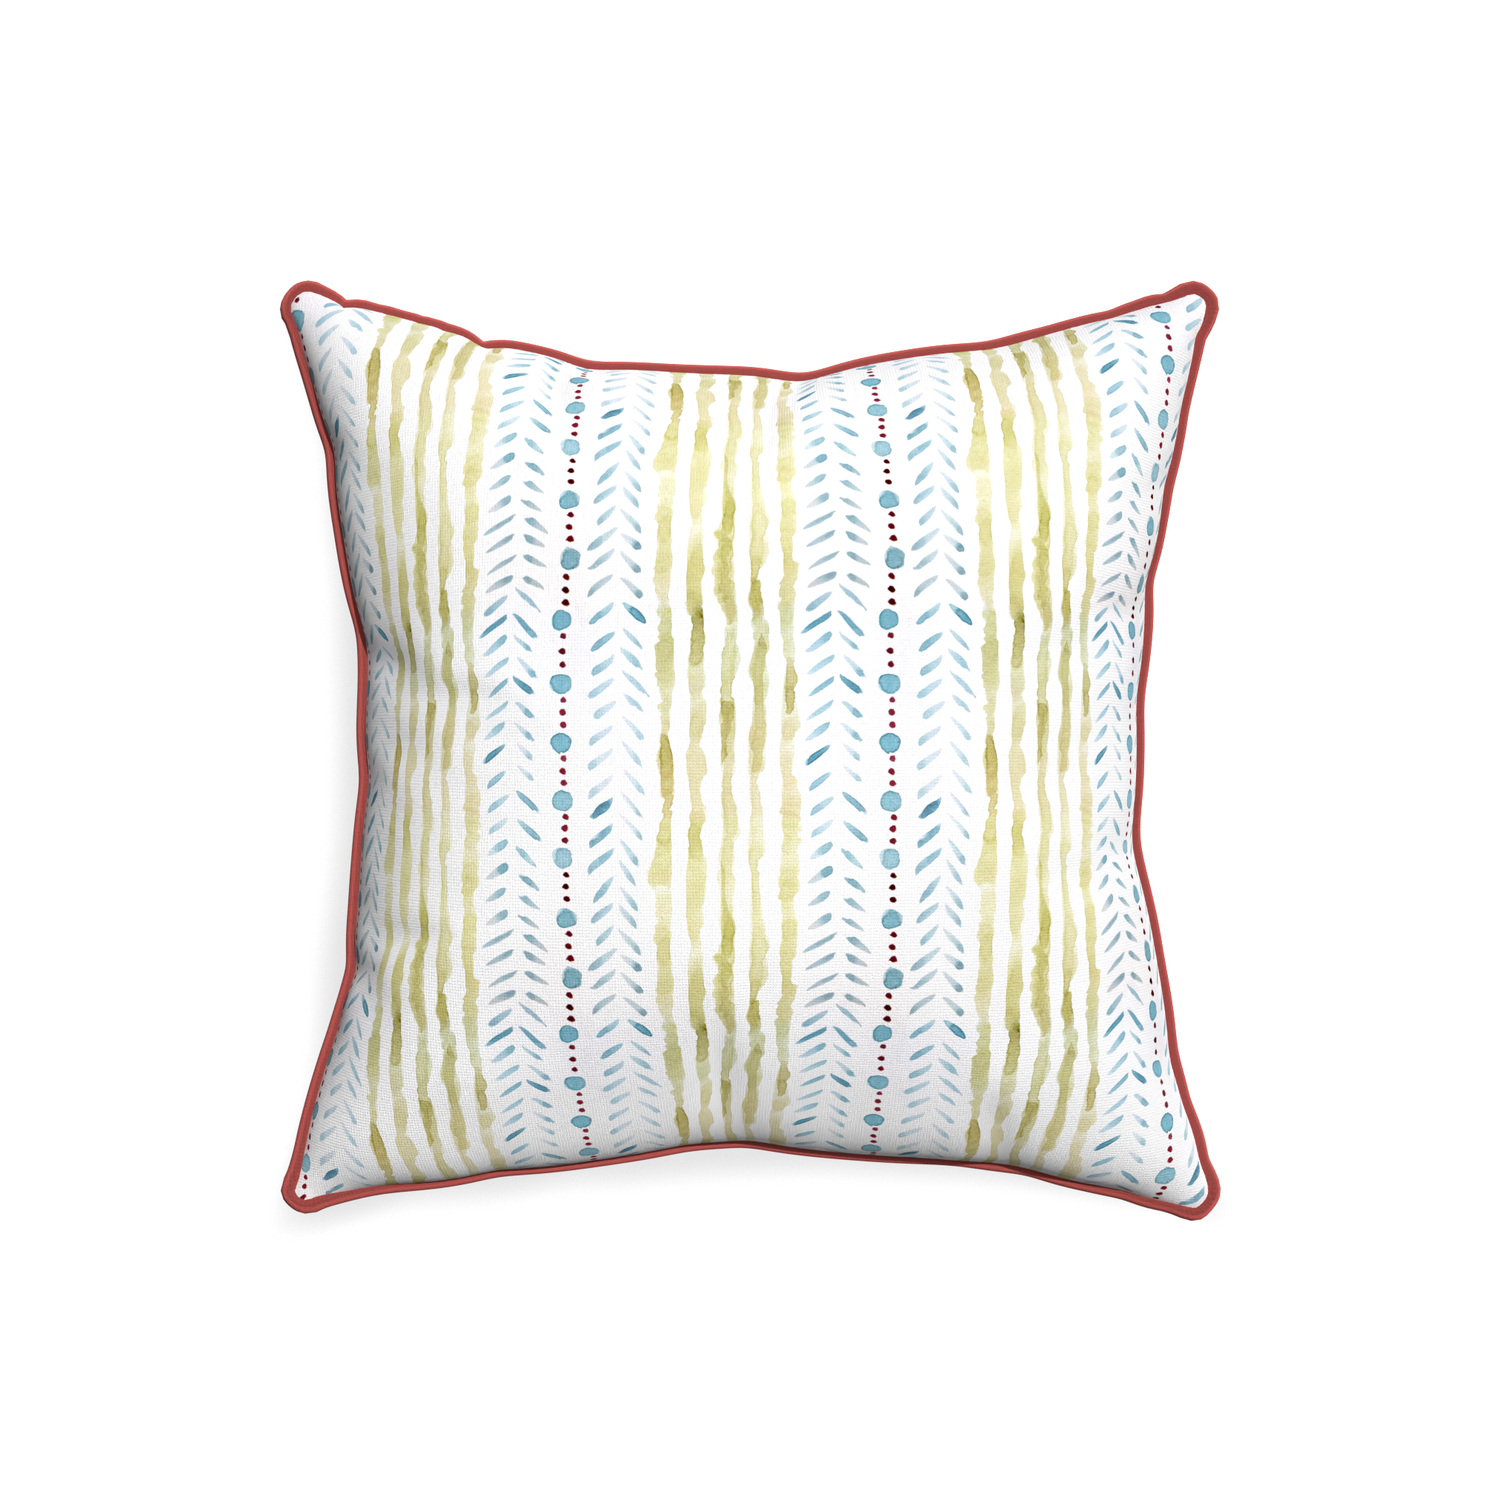 20-square julia custom blue & green stripedpillow with c piping on white background